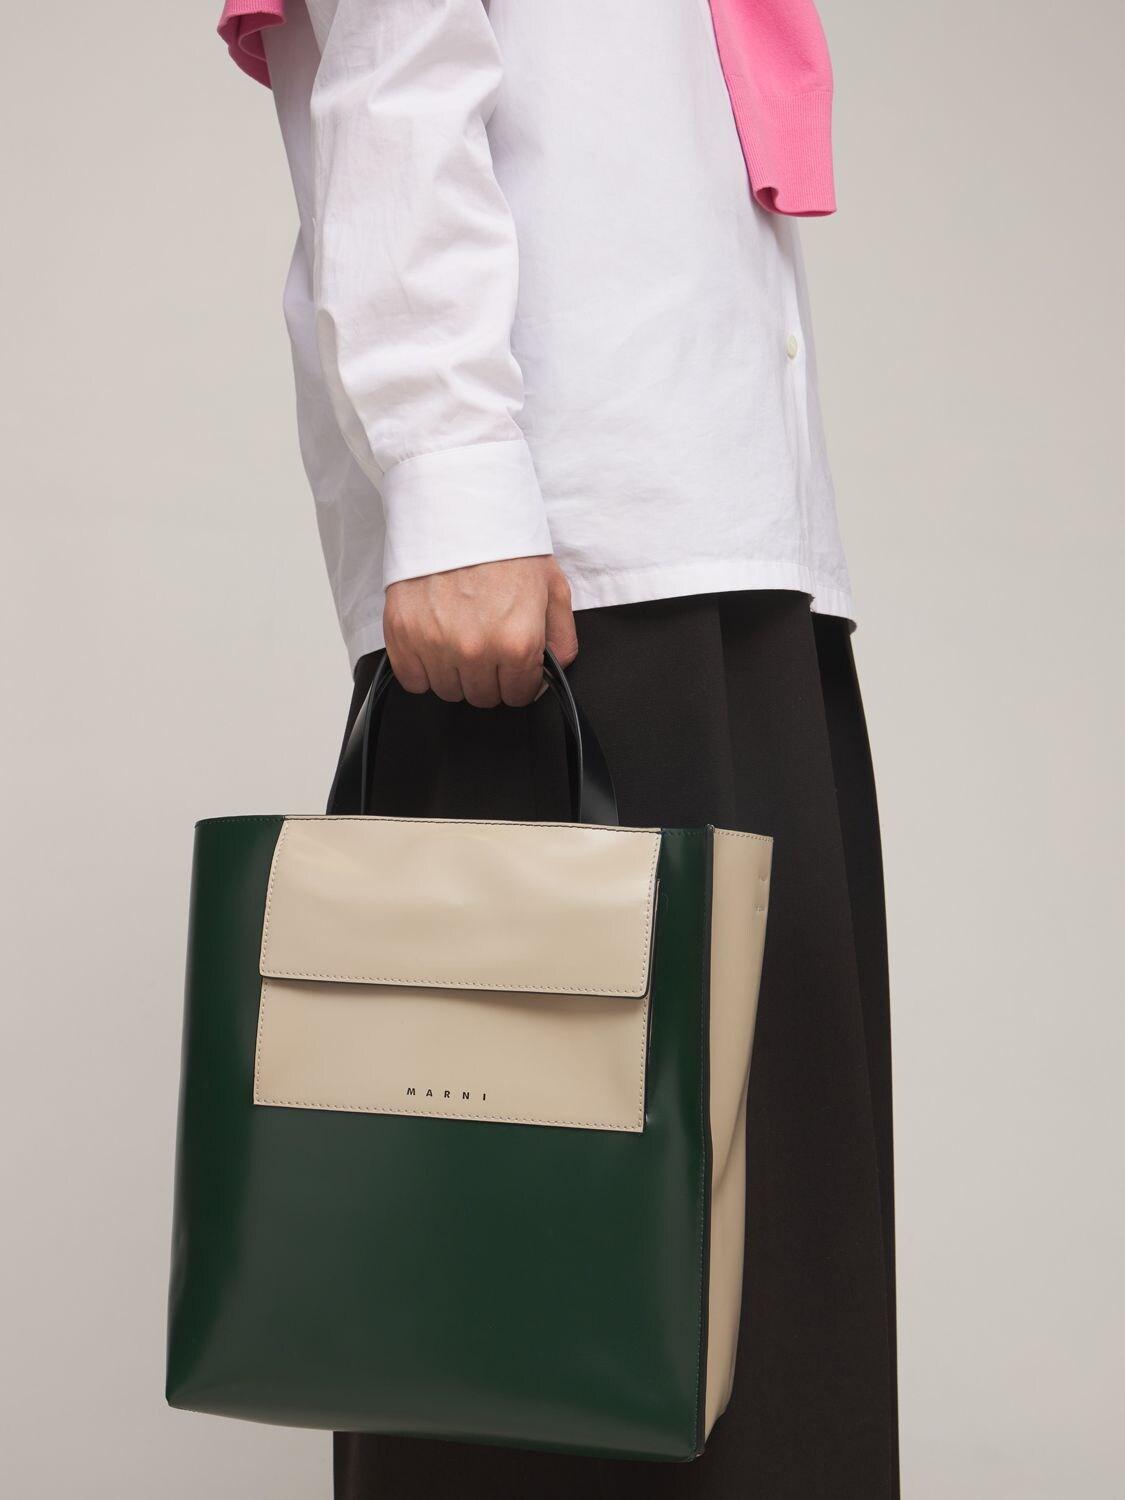 Marni Small Museo Leather Tote Bag W/pocket in Green | Lyst